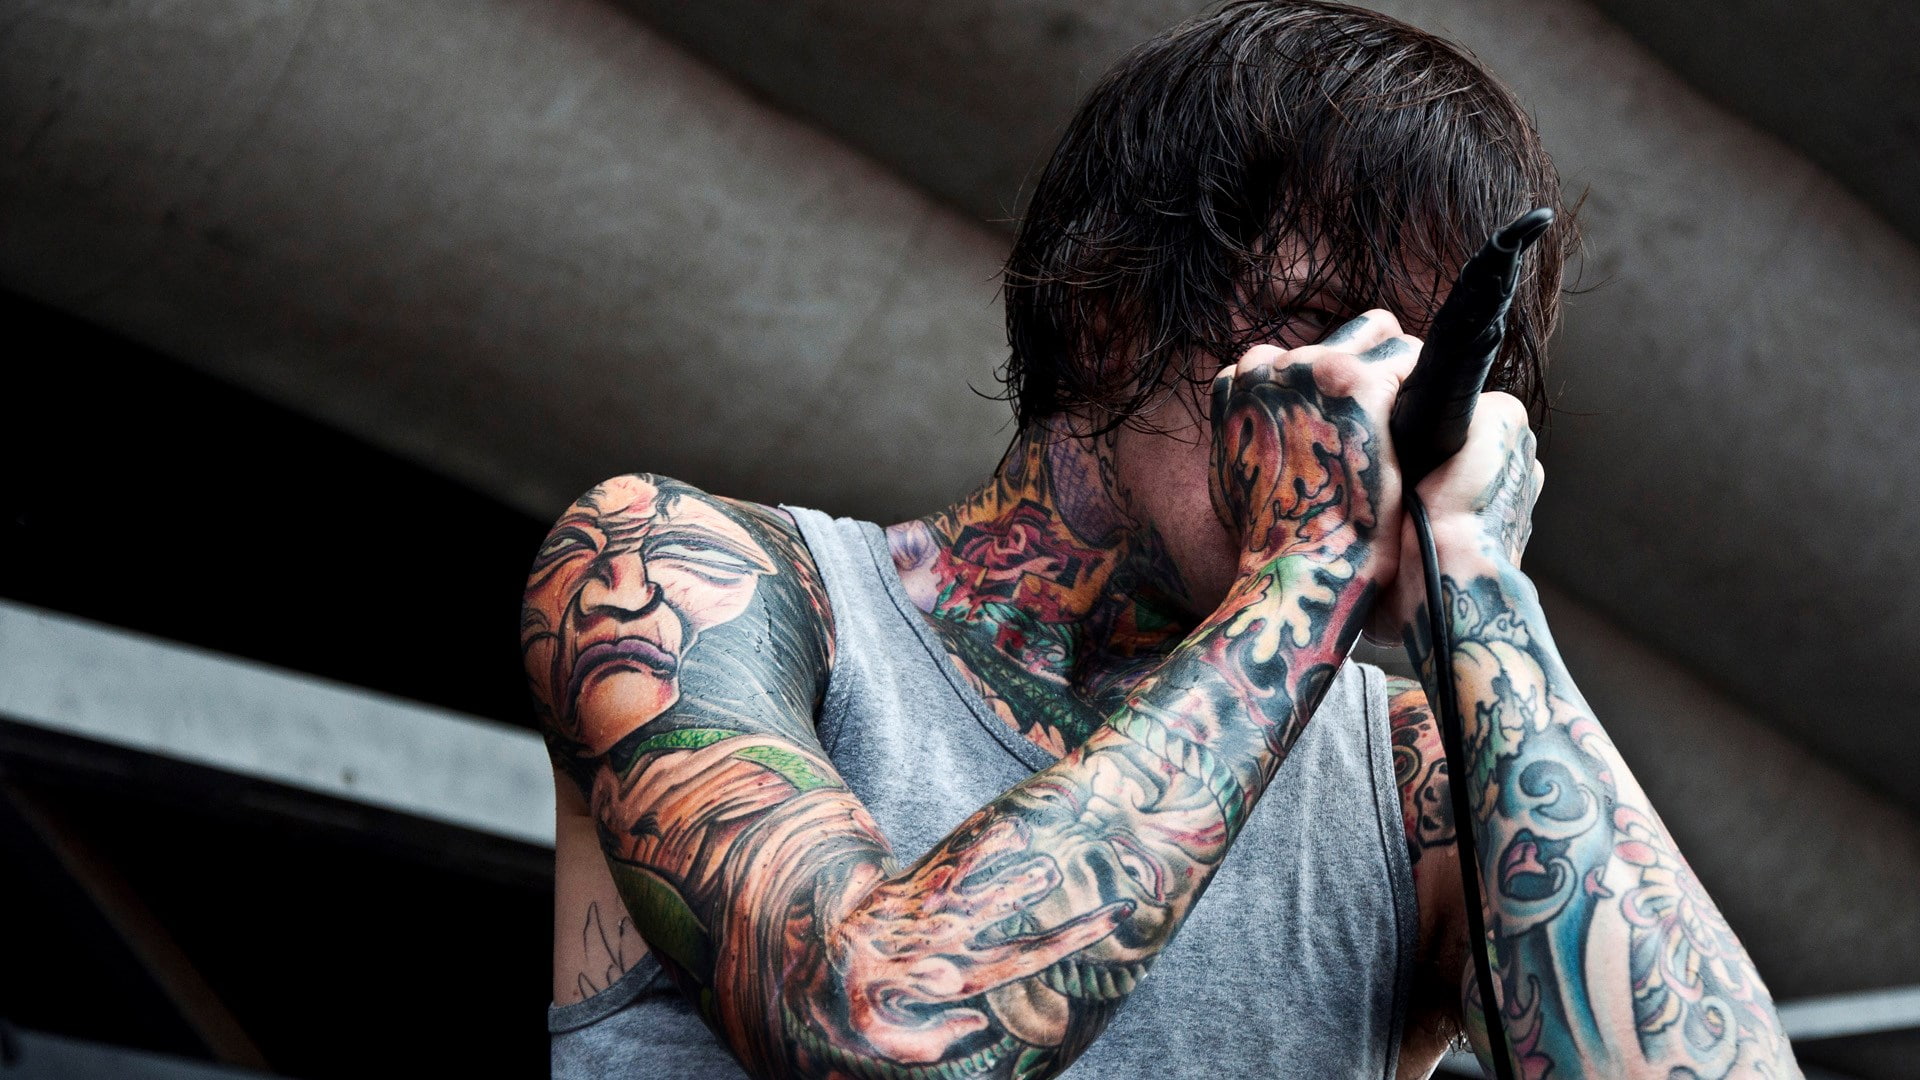 suicide silence, tattoo, one person, fashion, adult, creativity